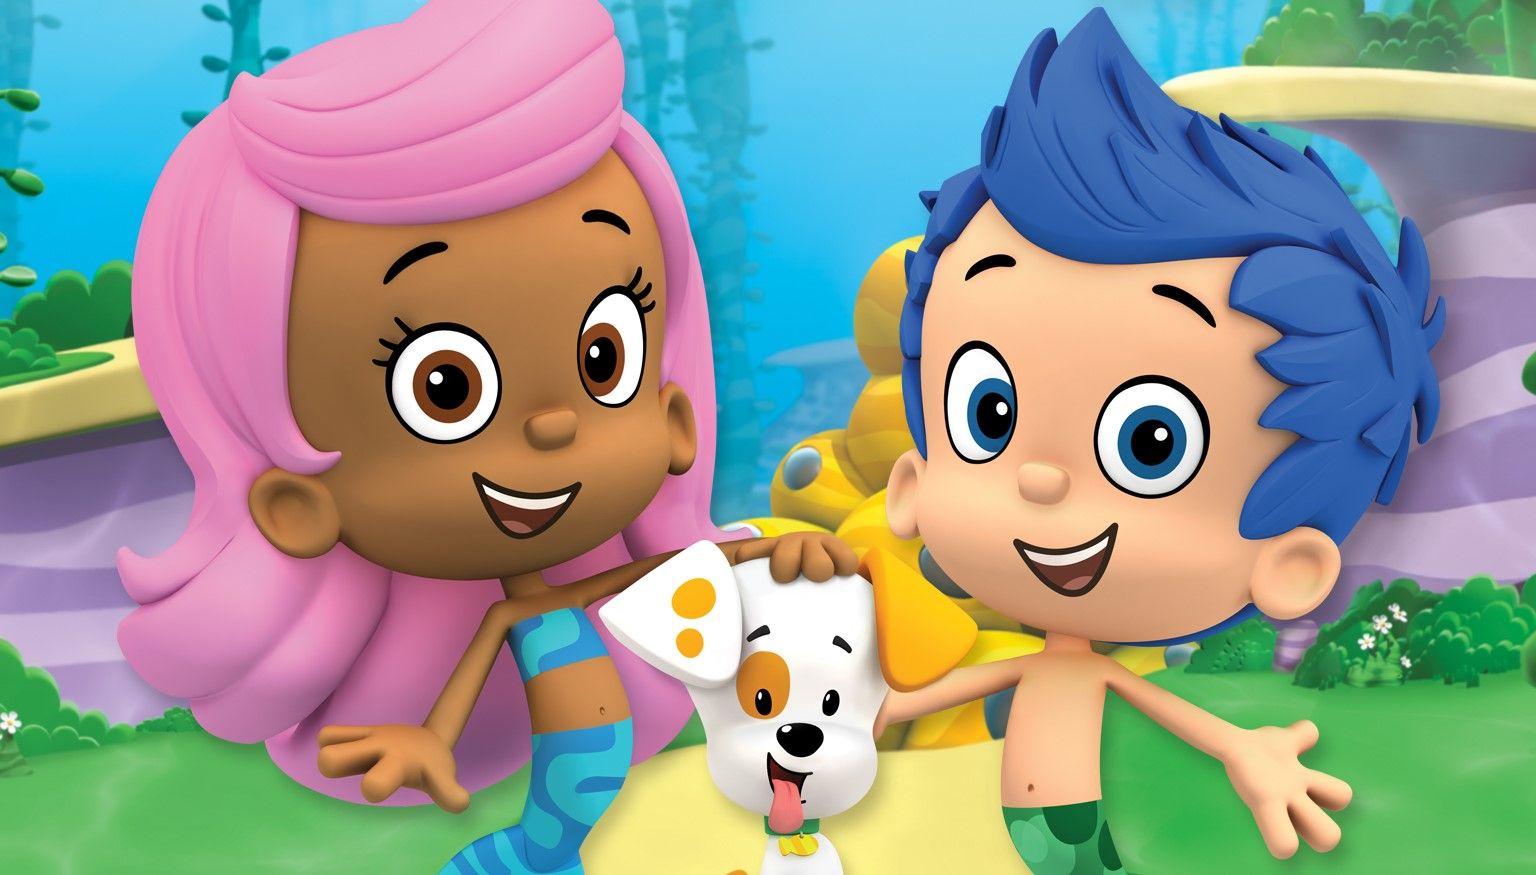 Bubble Guppies Wallpaper High Quality